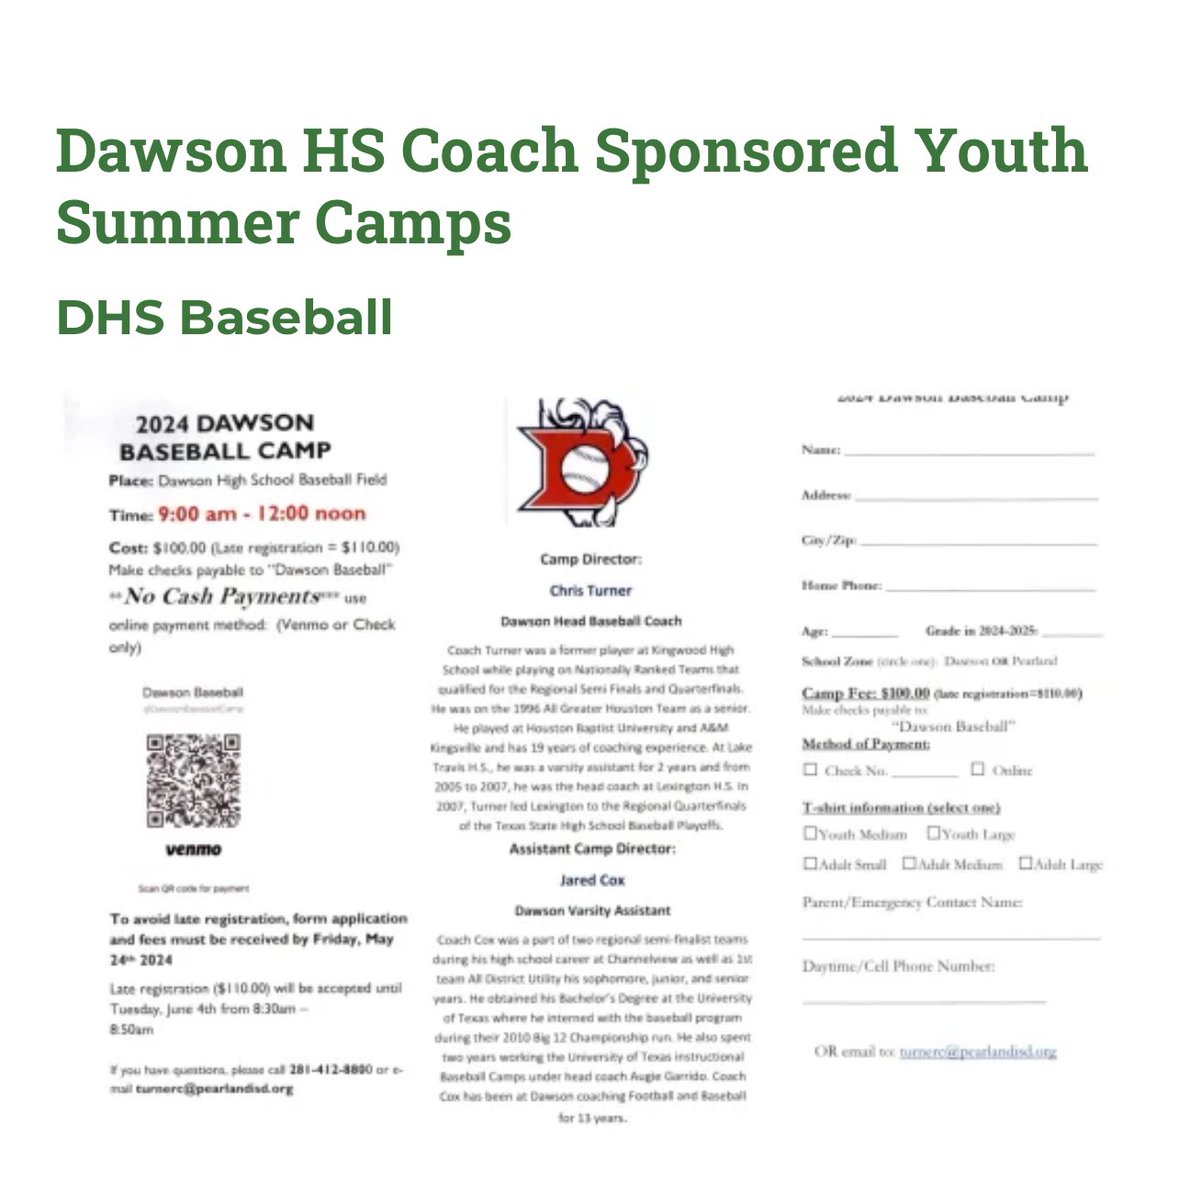 Don’t miss out on Dawson Baseball Camp this summer! When: June 4th-6th Time: 9:00am-12:00pm Where: Dawson HS baseball field Sign up now!! For any questions, please call 281-412-8800 or email Coach Turner at turnerc@pearlandisd.org